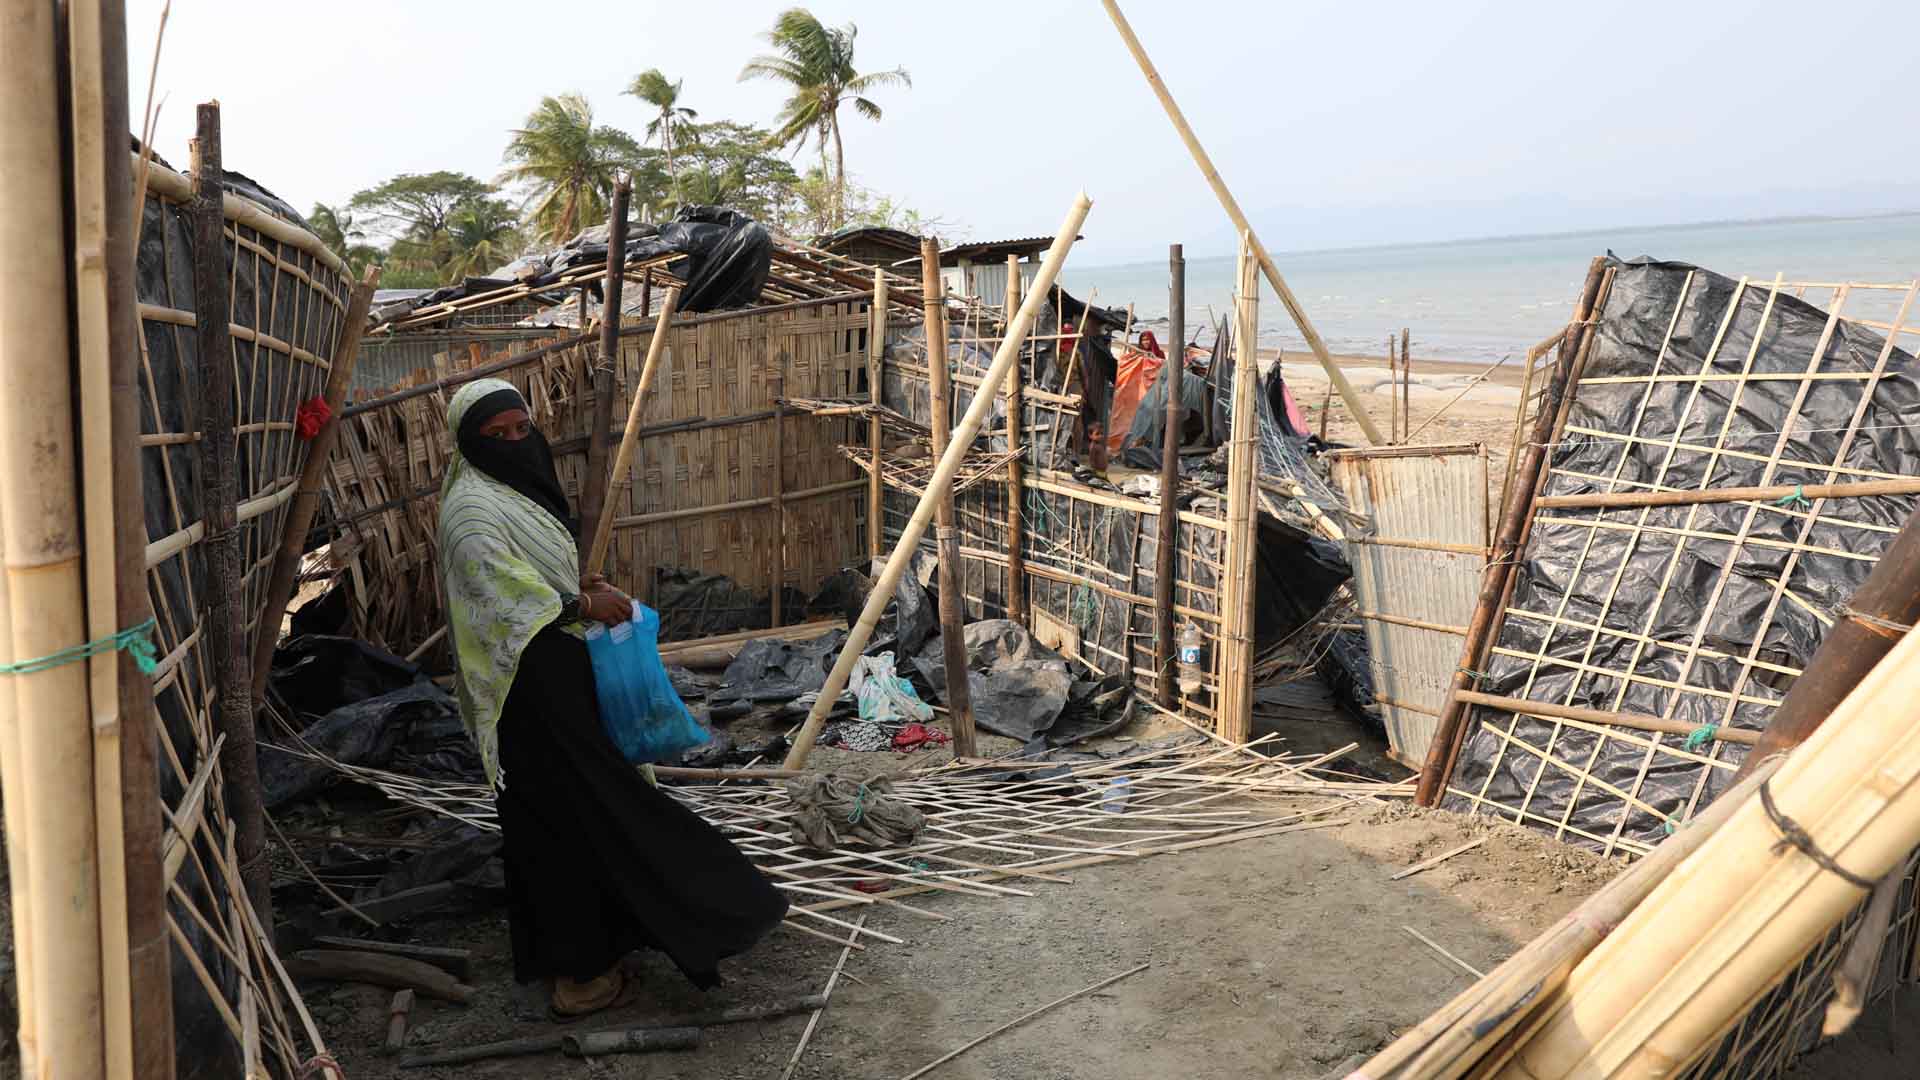 A woman stands to the side of the interior of the remnants of a house that was destroyed by Cyclone Mocha.